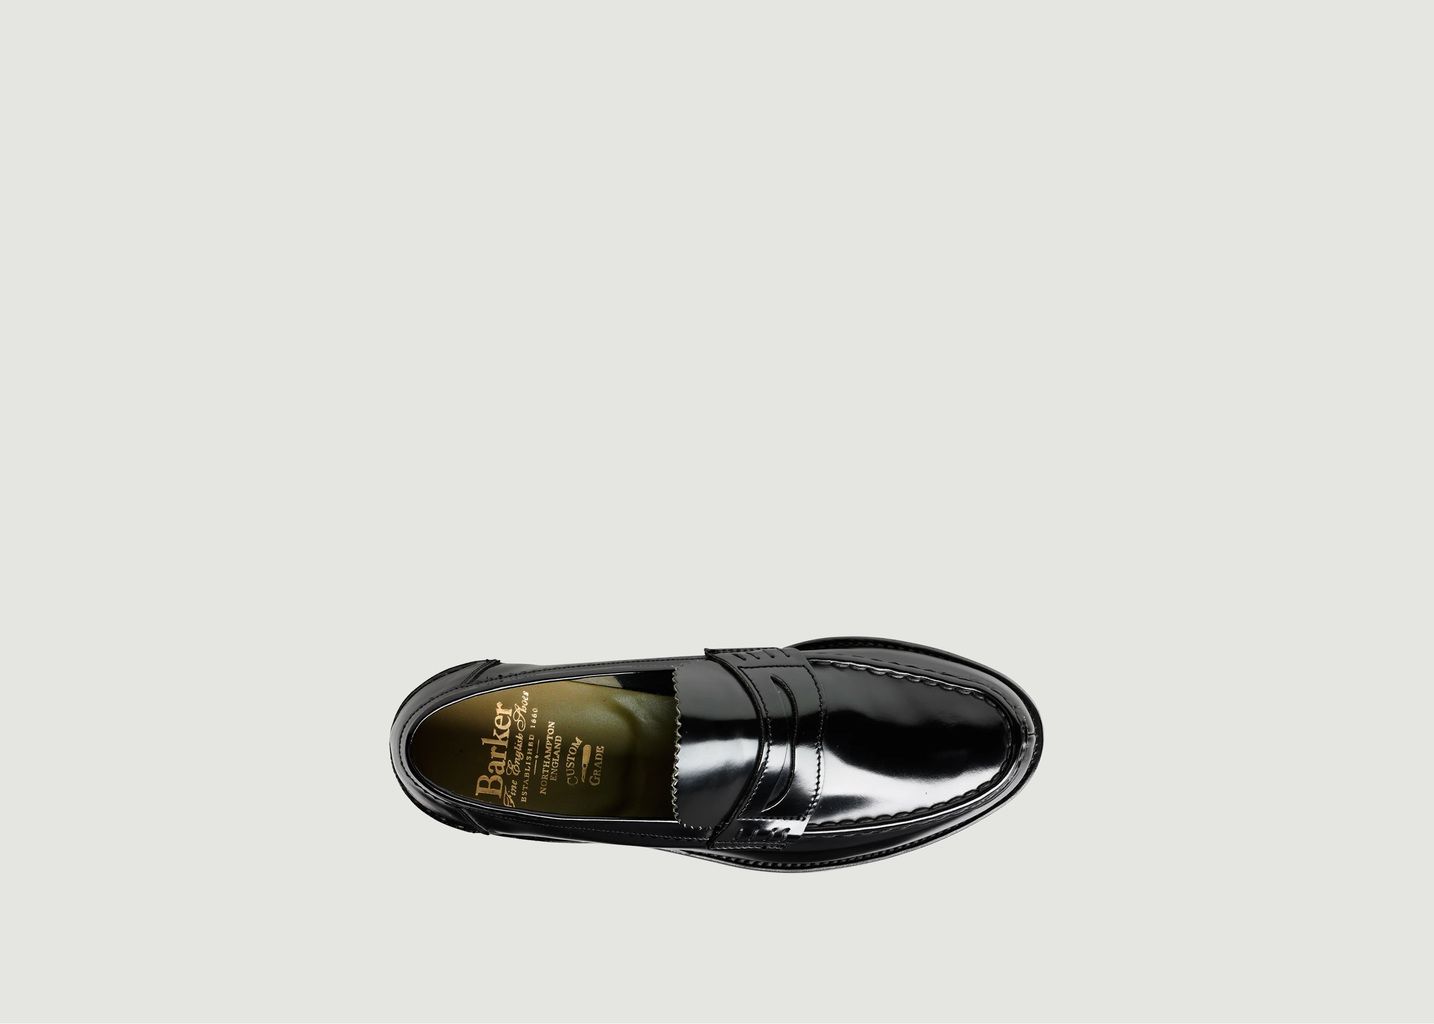 Loafers Caruso - Barker Shoes